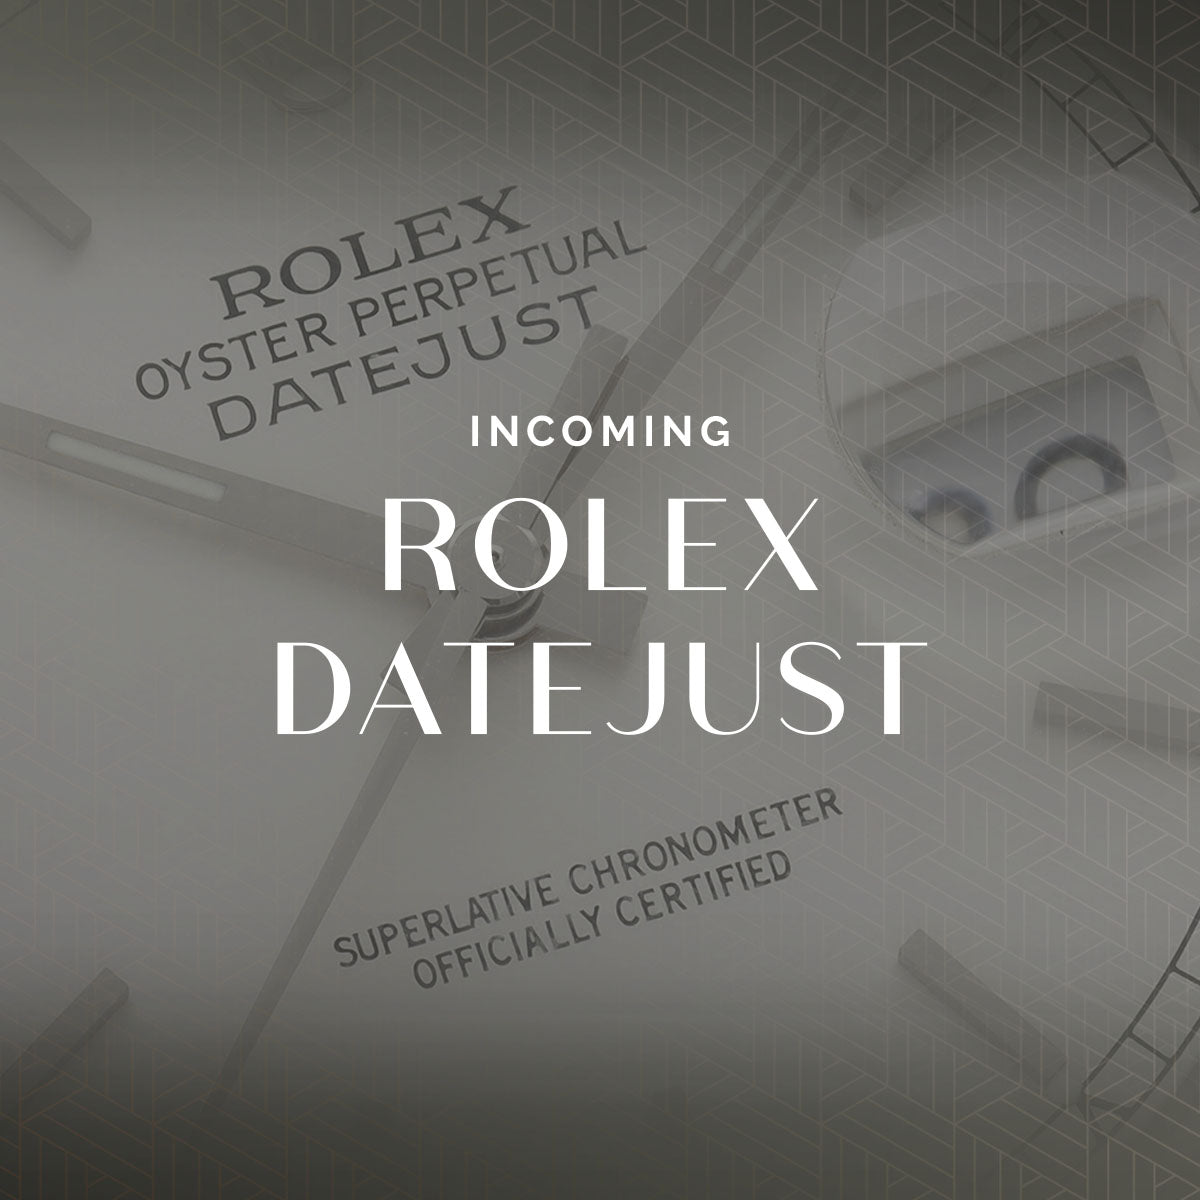 Rolex Datejust 1603 Silver soleil dial - incoming